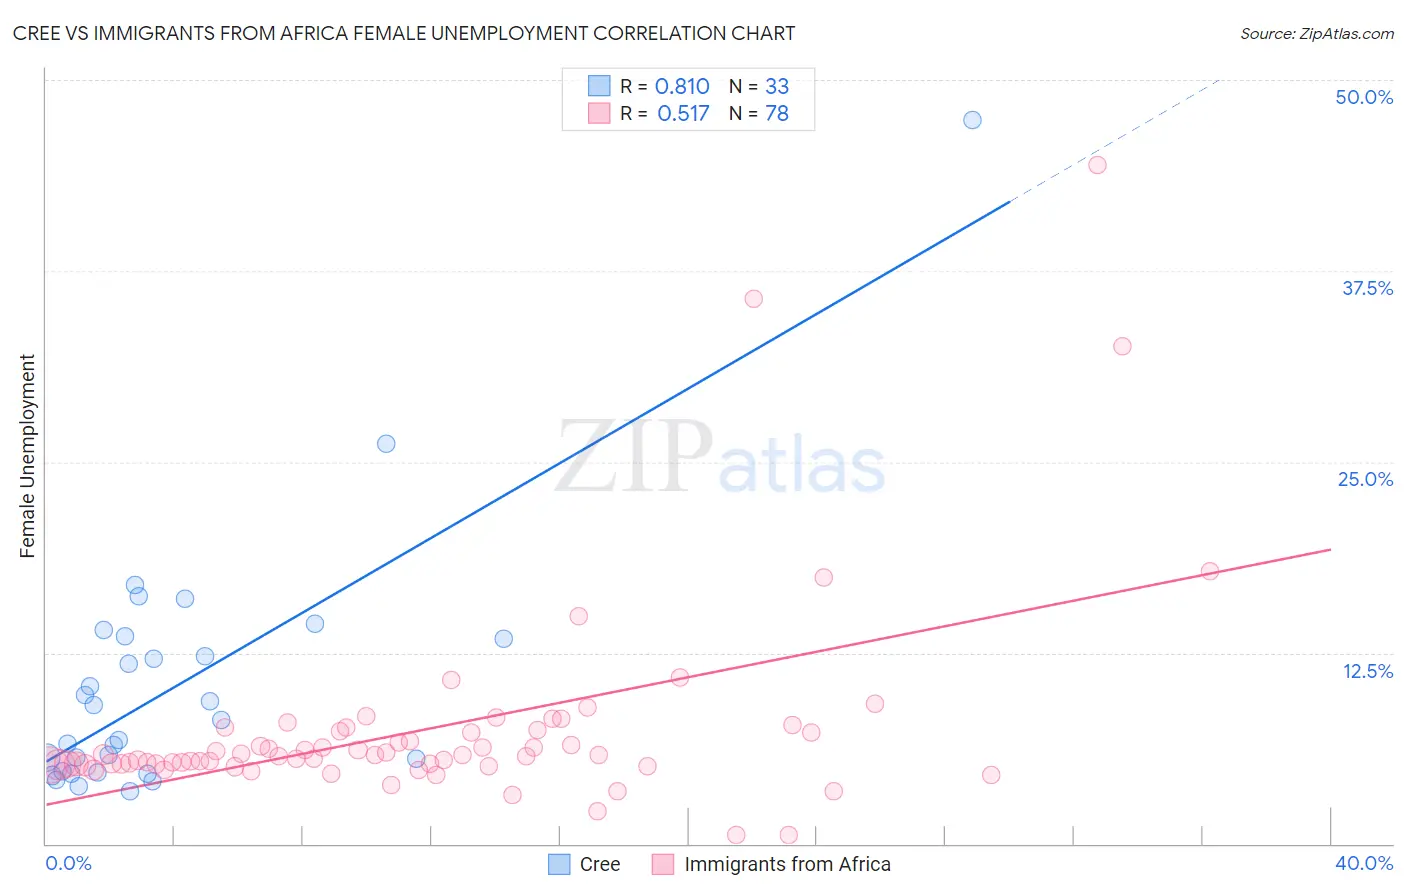 Cree vs Immigrants from Africa Female Unemployment